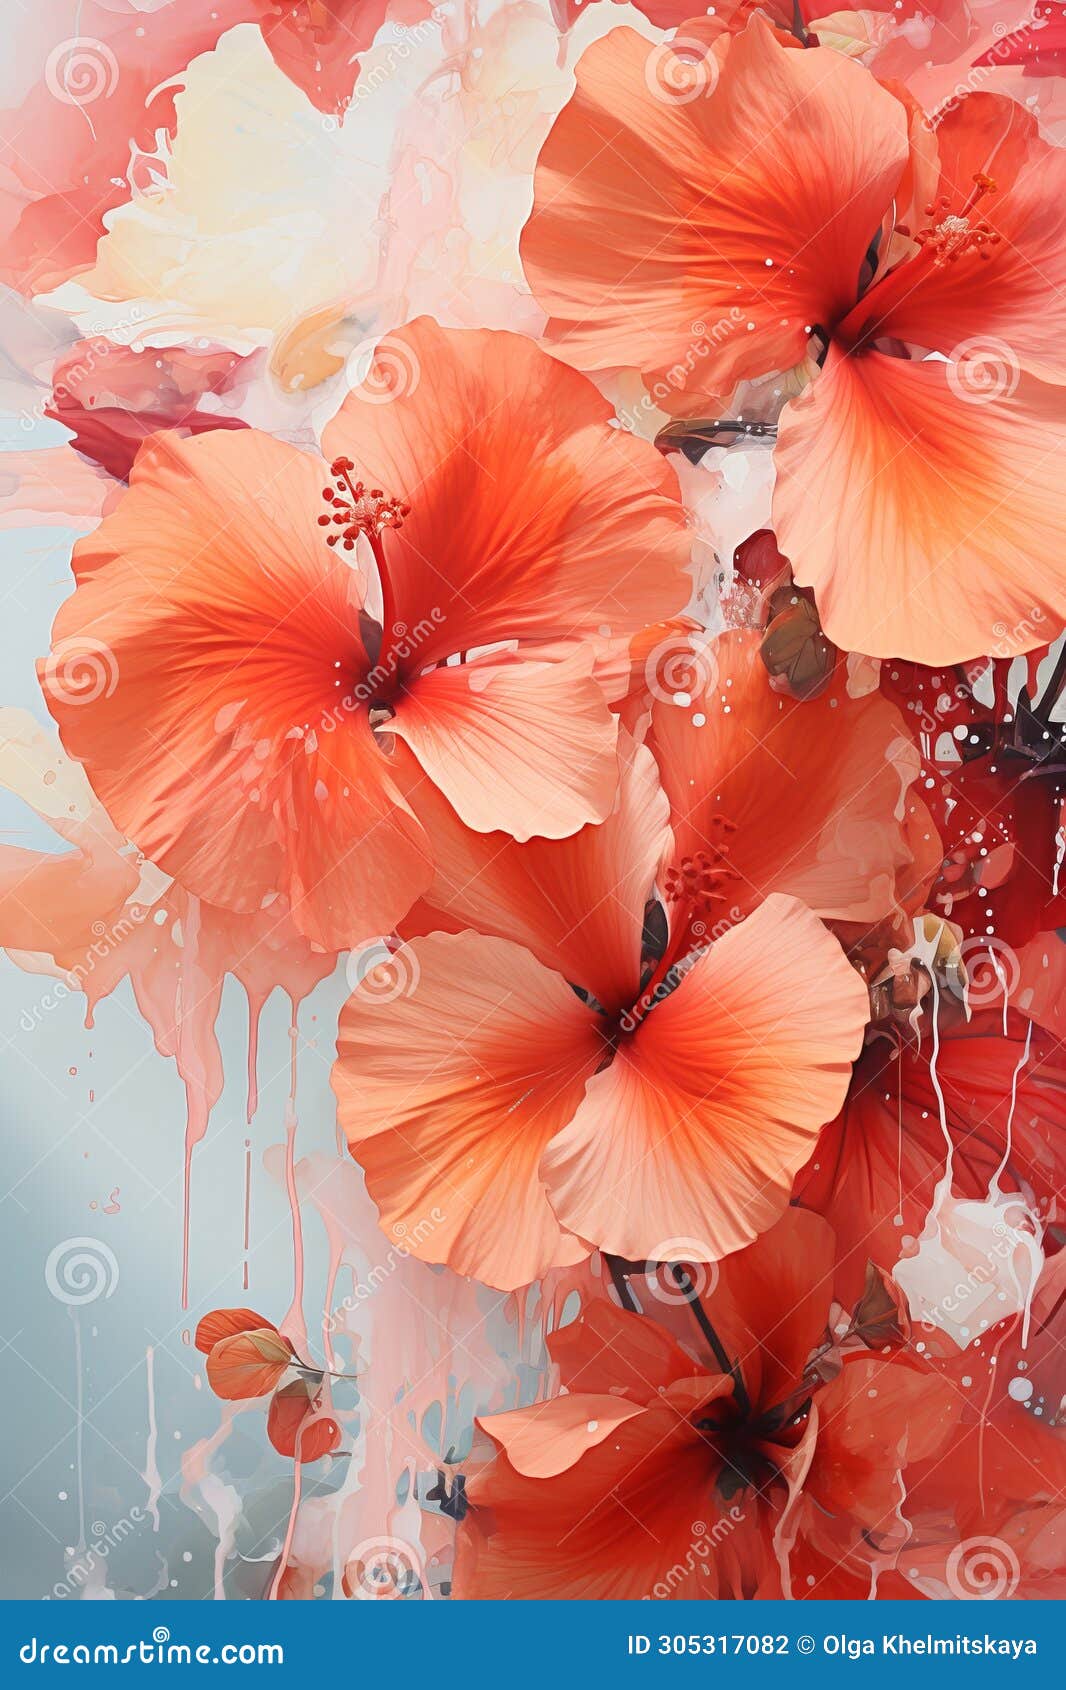 contemporary floral abstraction. vibrant and modern depictions of flowers and botanical s. vertical